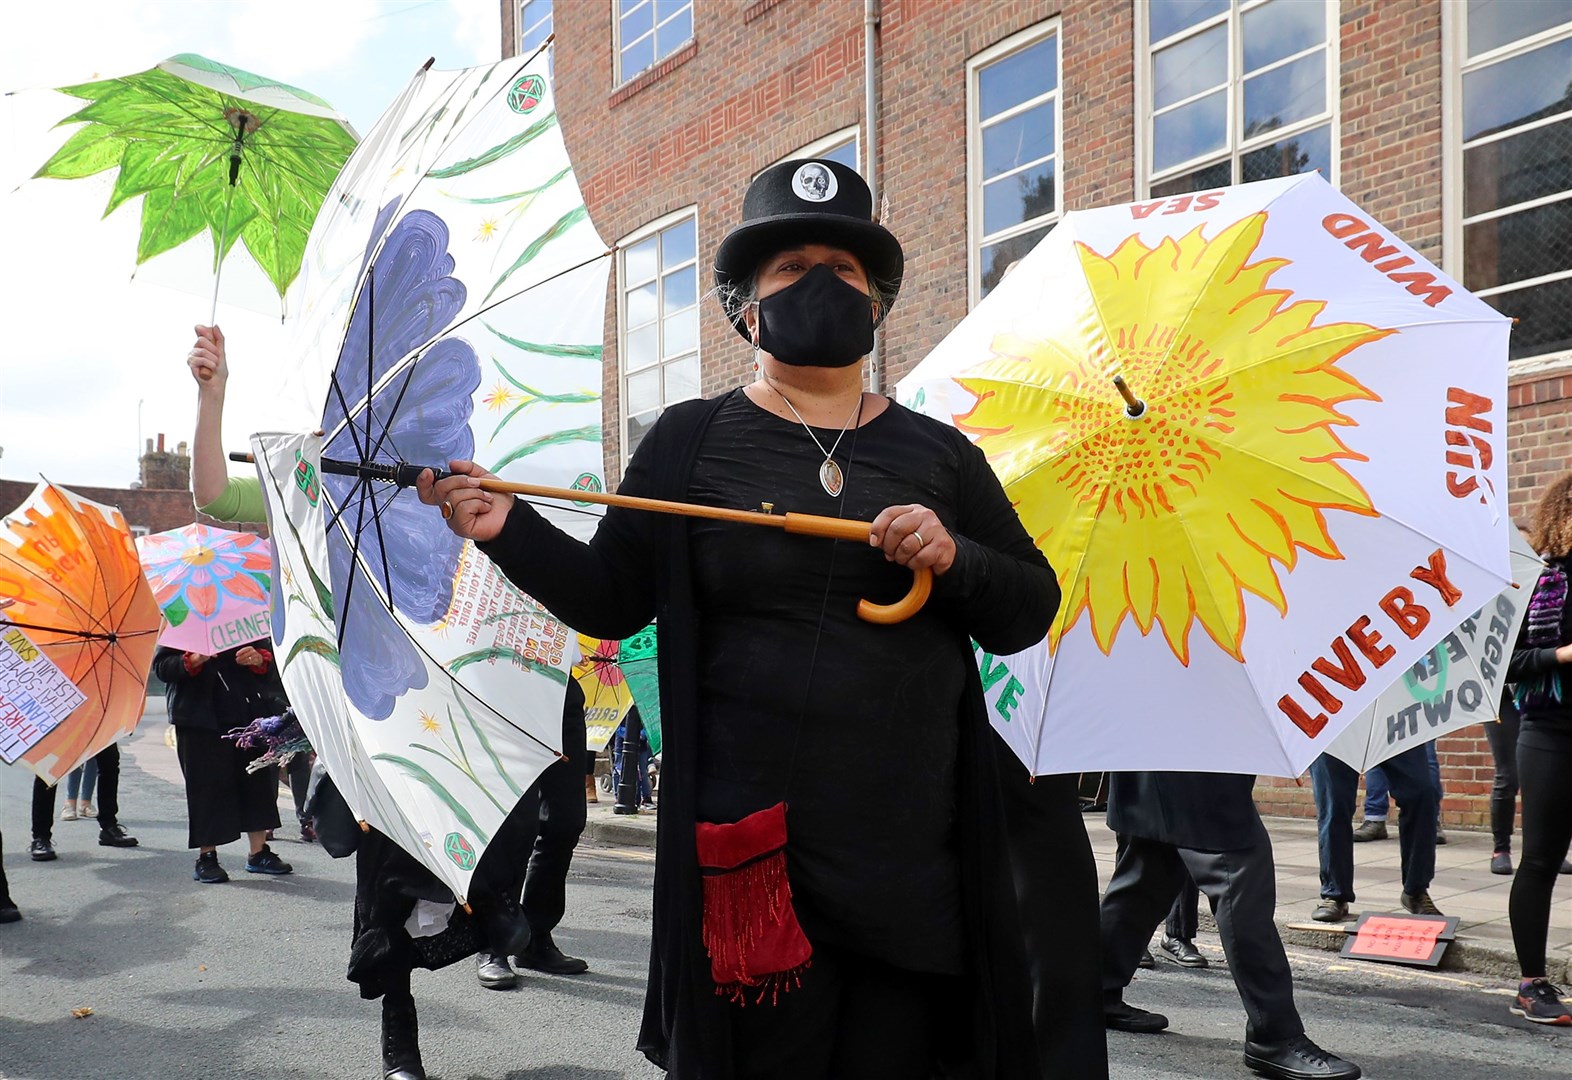 In Lewes, East Sussex, protesters carried umbrellas to mimic New Orleans’ funeral processions (Gareth Fuller/PA)